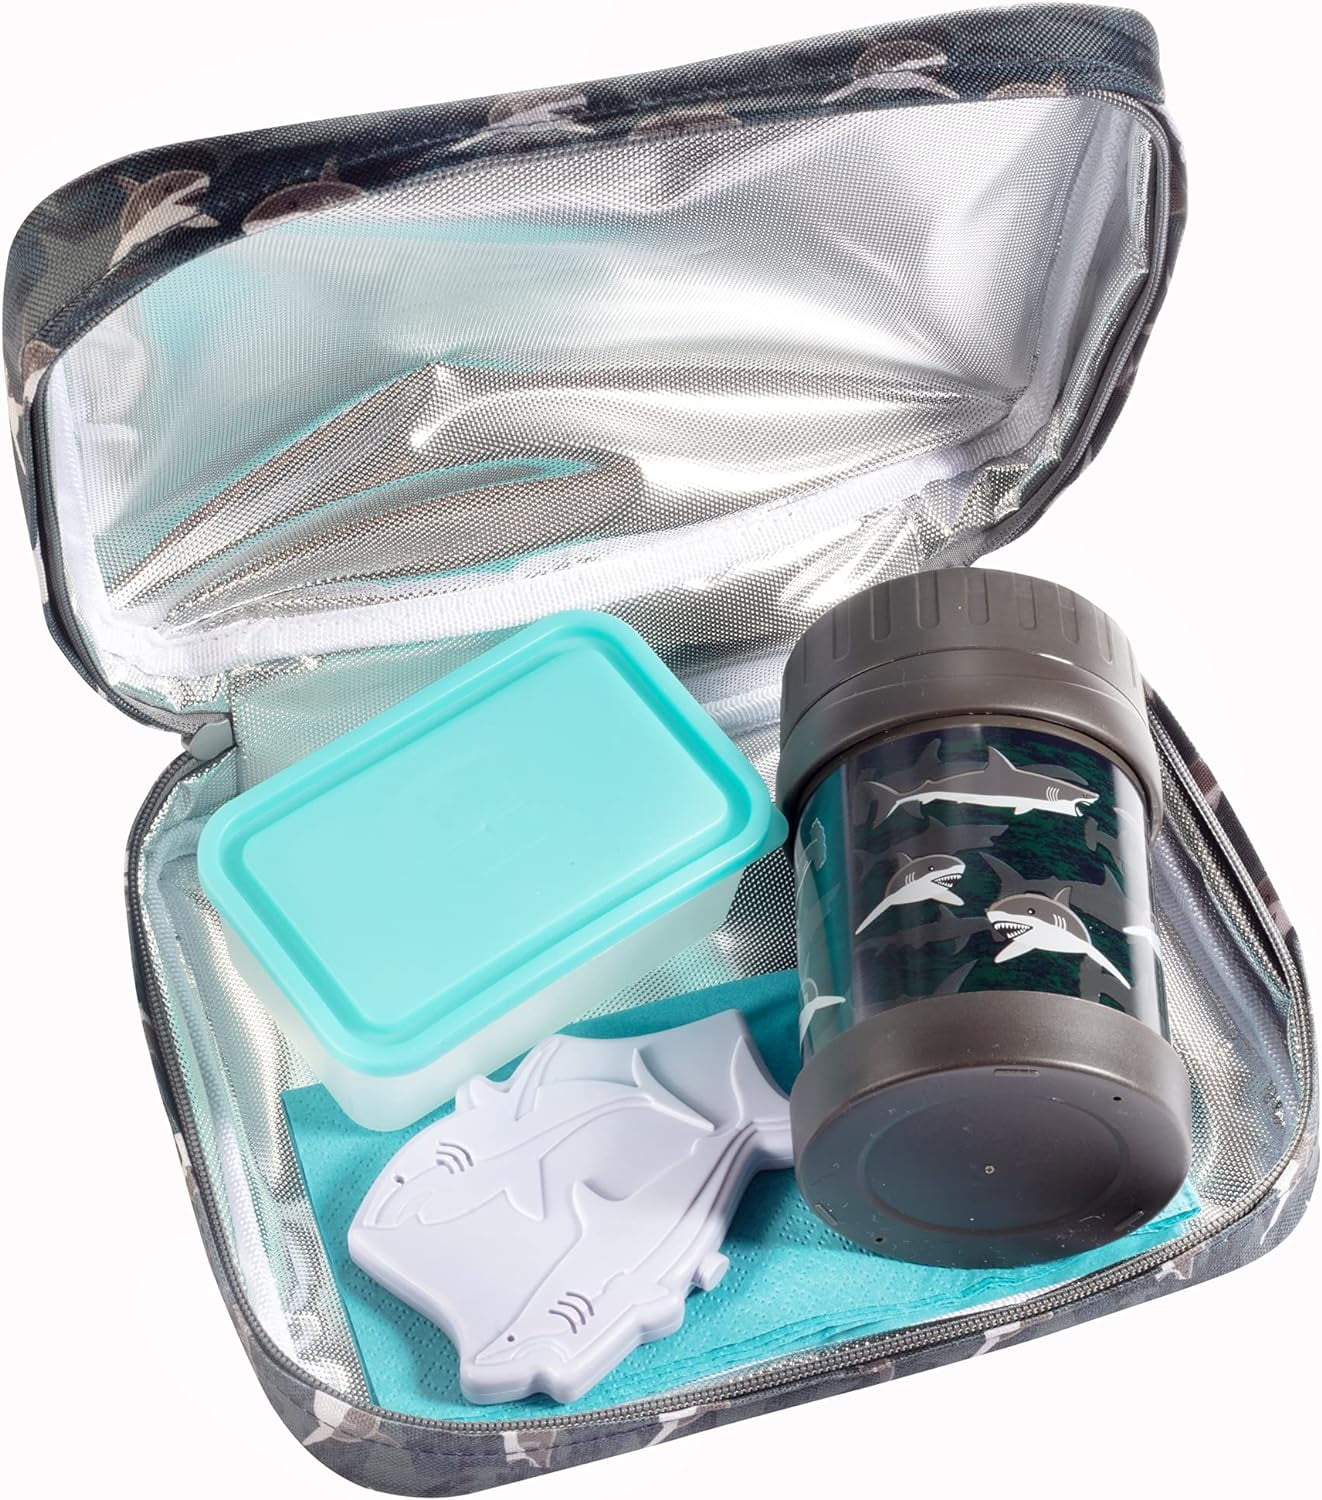 Ice Packs in Lunch Boxes: Are They Necessary? – Nice Packs